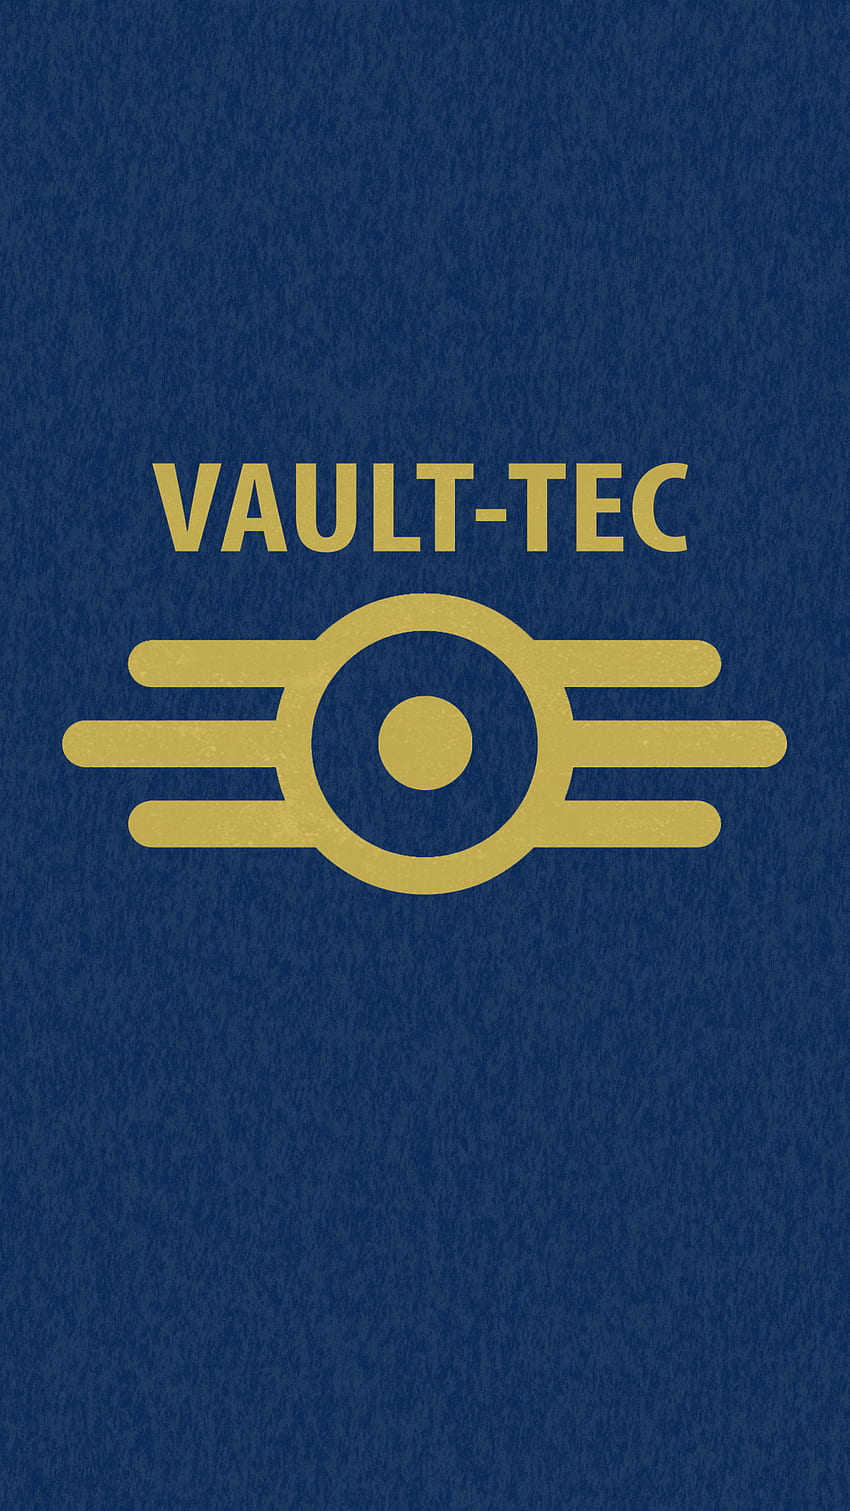 My Fallout Vault - Tec Android のセットアップ HD電話の壁紙